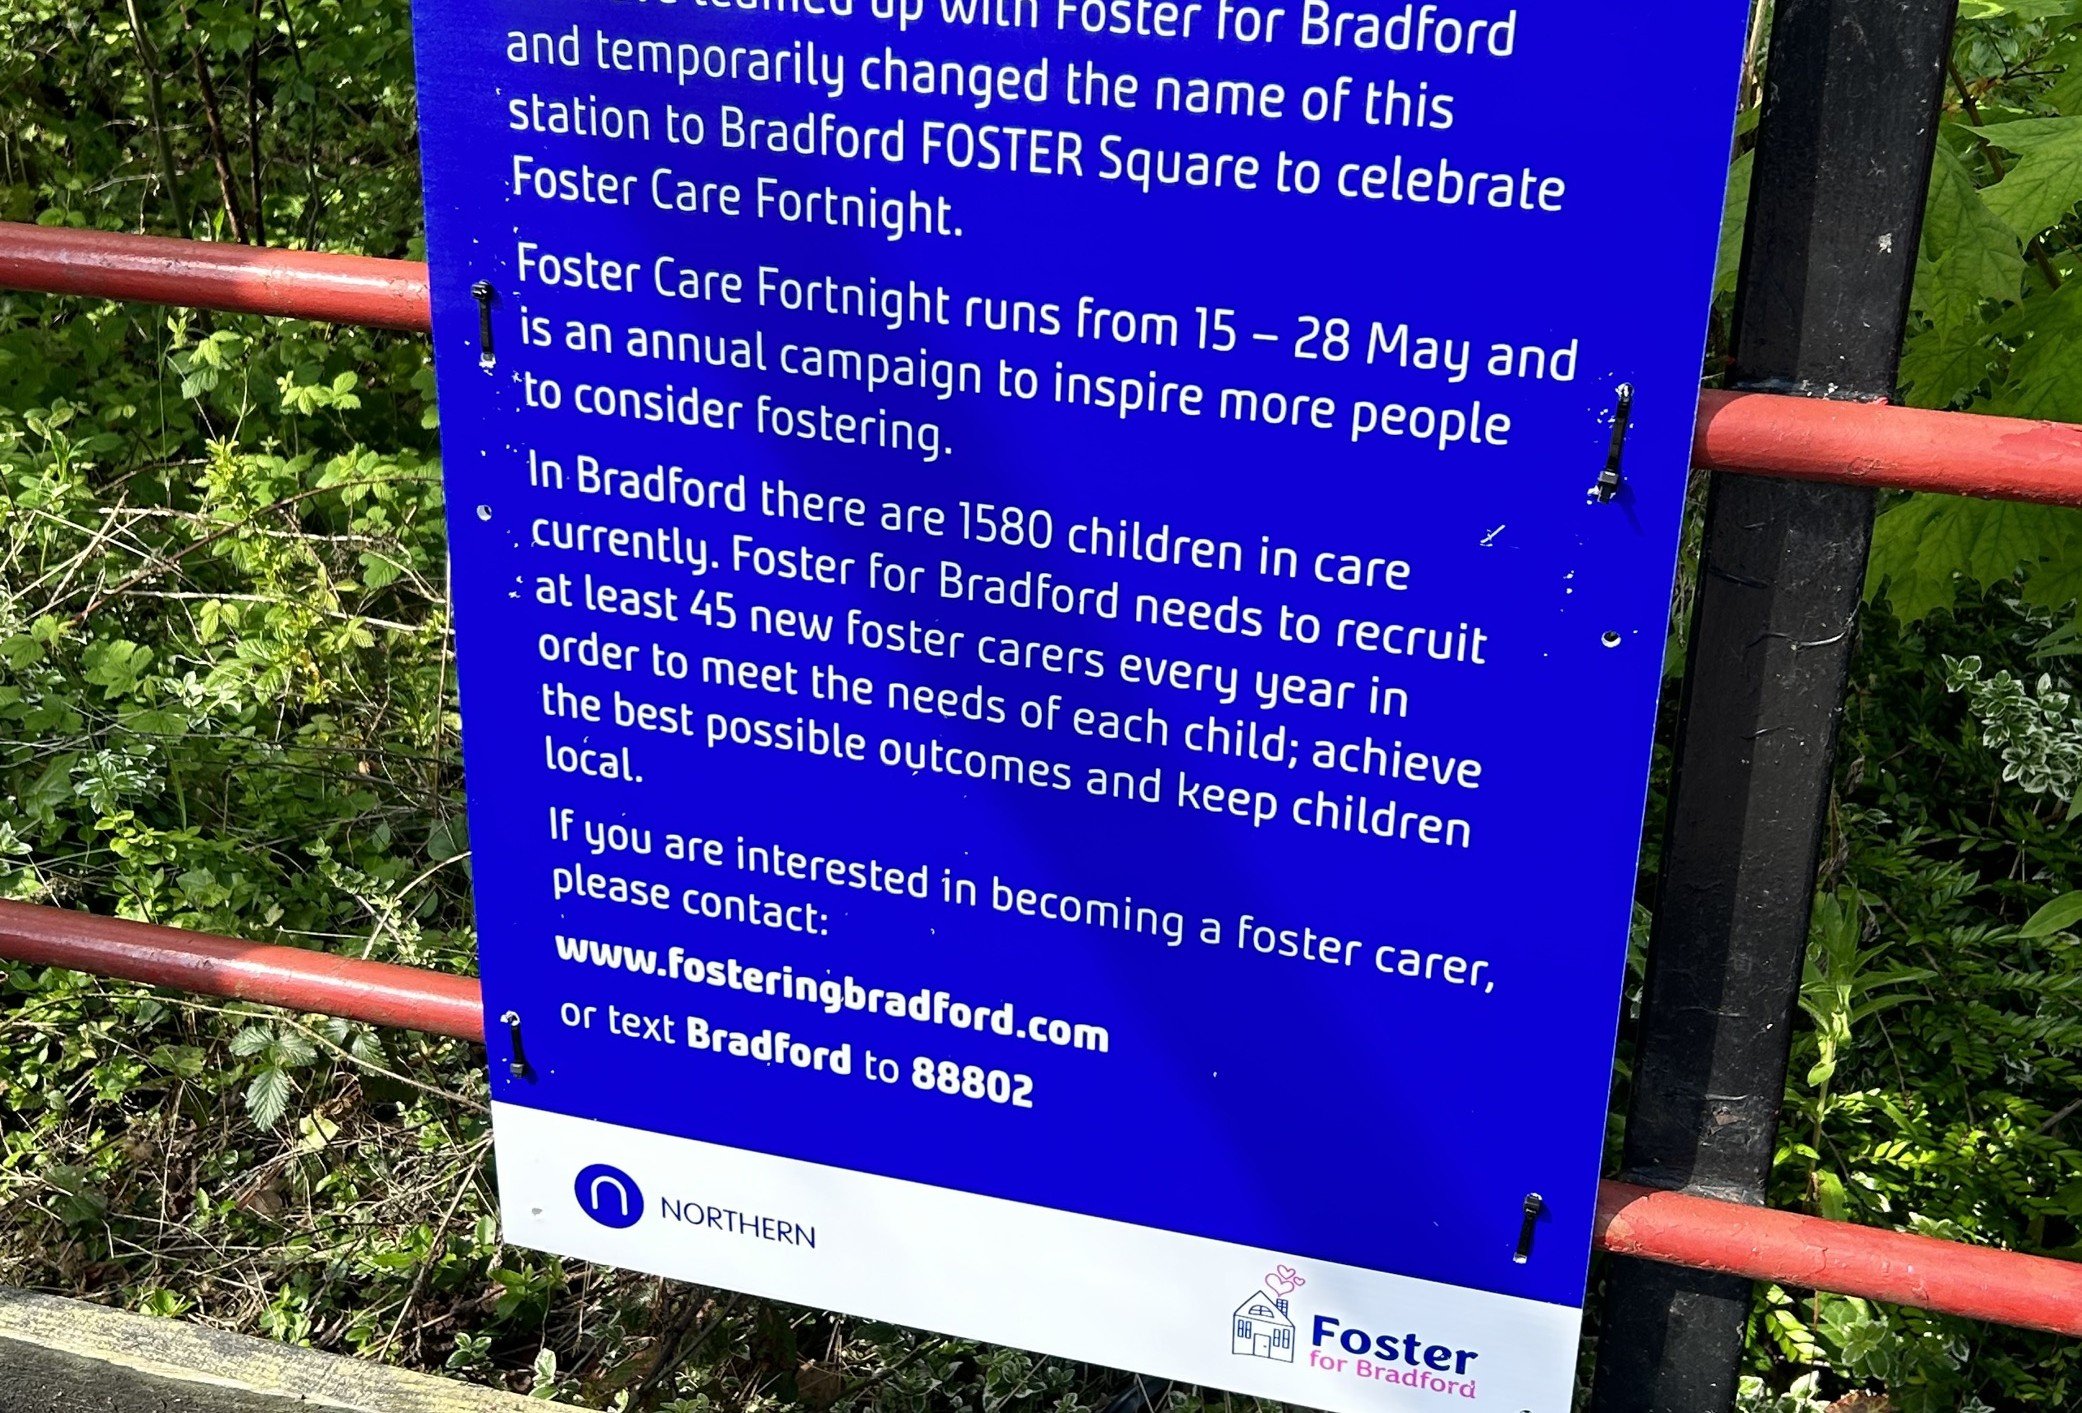 this-image-shows-the-temporary-signage-change-from-bradfor-forster-square-to-bradford-foster-square-2